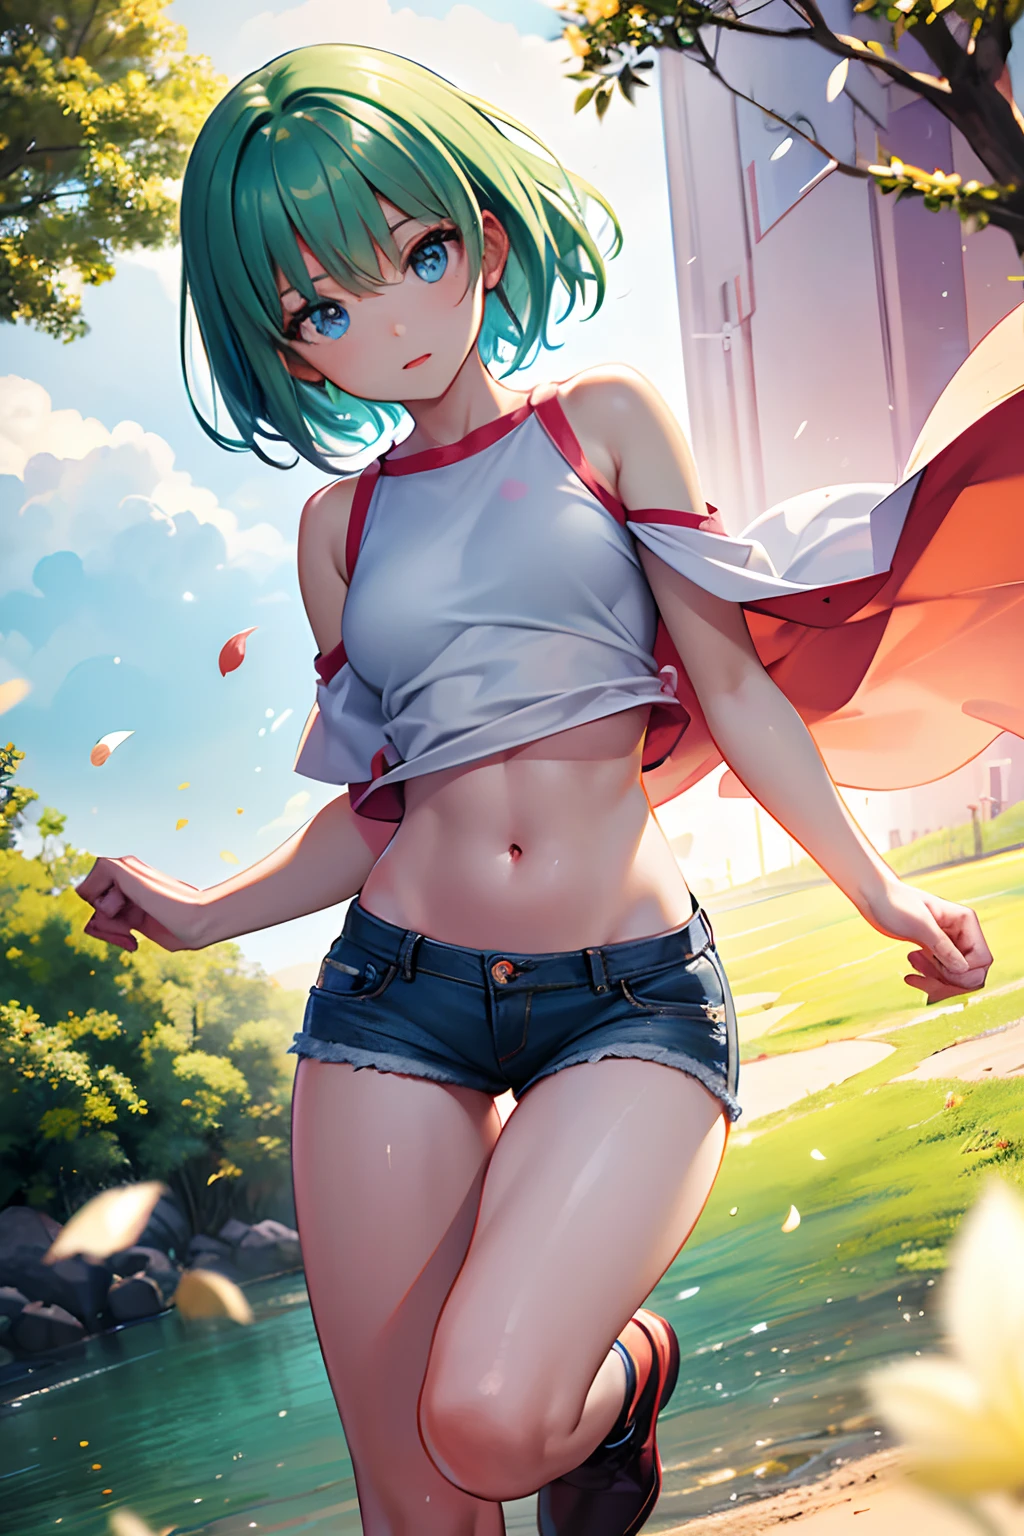 colorful auspicious clouds, sakura, leaf, tree, waterfall, acorn, soil, blurry_foreground, 1girl, day, painting, depth_of_field, blurry, (best quality), ((masterpiece)), cute anime girl, green hair, short hair, red t-shirt, cutout above navel, blue denim shorts, black boots, forest, c(lean detailed faces), analogous colors, beautiful gradient, clean image, high quality, high detail, high definition, cute face, 4k resolution, full body, ultra sharp focus, extremely detailed eyes, blue eyes, detailed symmetric realistic face, extremely detailed natural texture, perfectly centered medium, nikon d850 film stock photograph, kodak portra 400 camera f1.6 lens, extremely detailed, amazing, fine detail, rich colors, one body, fully clothed, face, head in frame, body in frame, good proportions